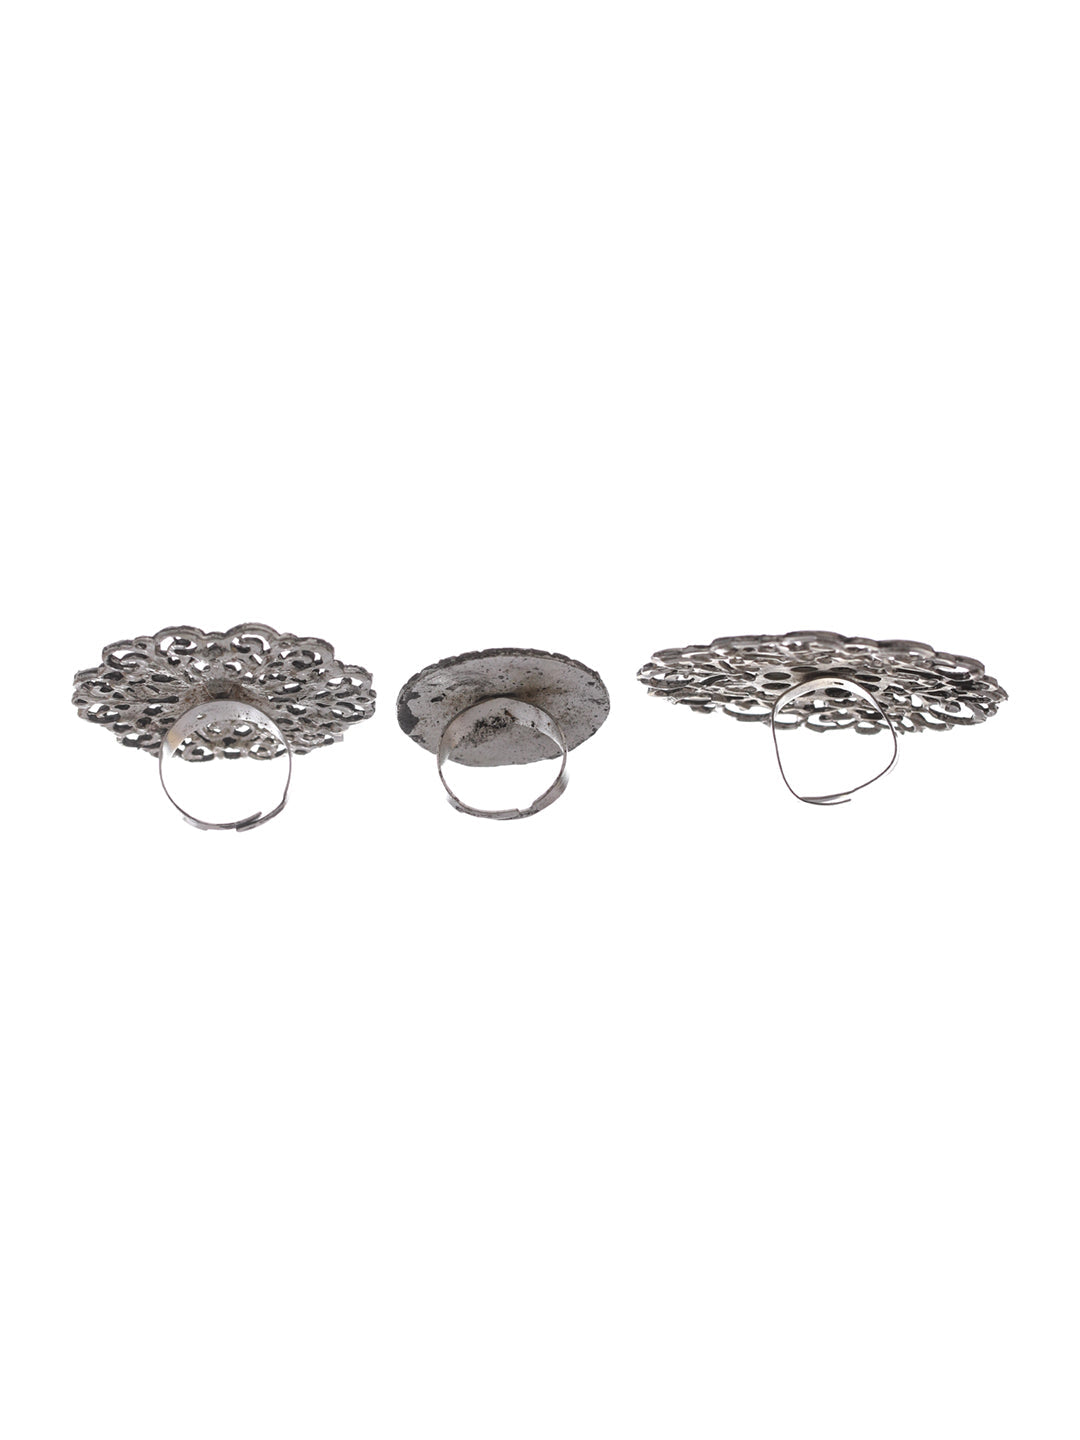 Floral Mirror Oxidised Silver Ring Set of 3 - NOZ2TOZ